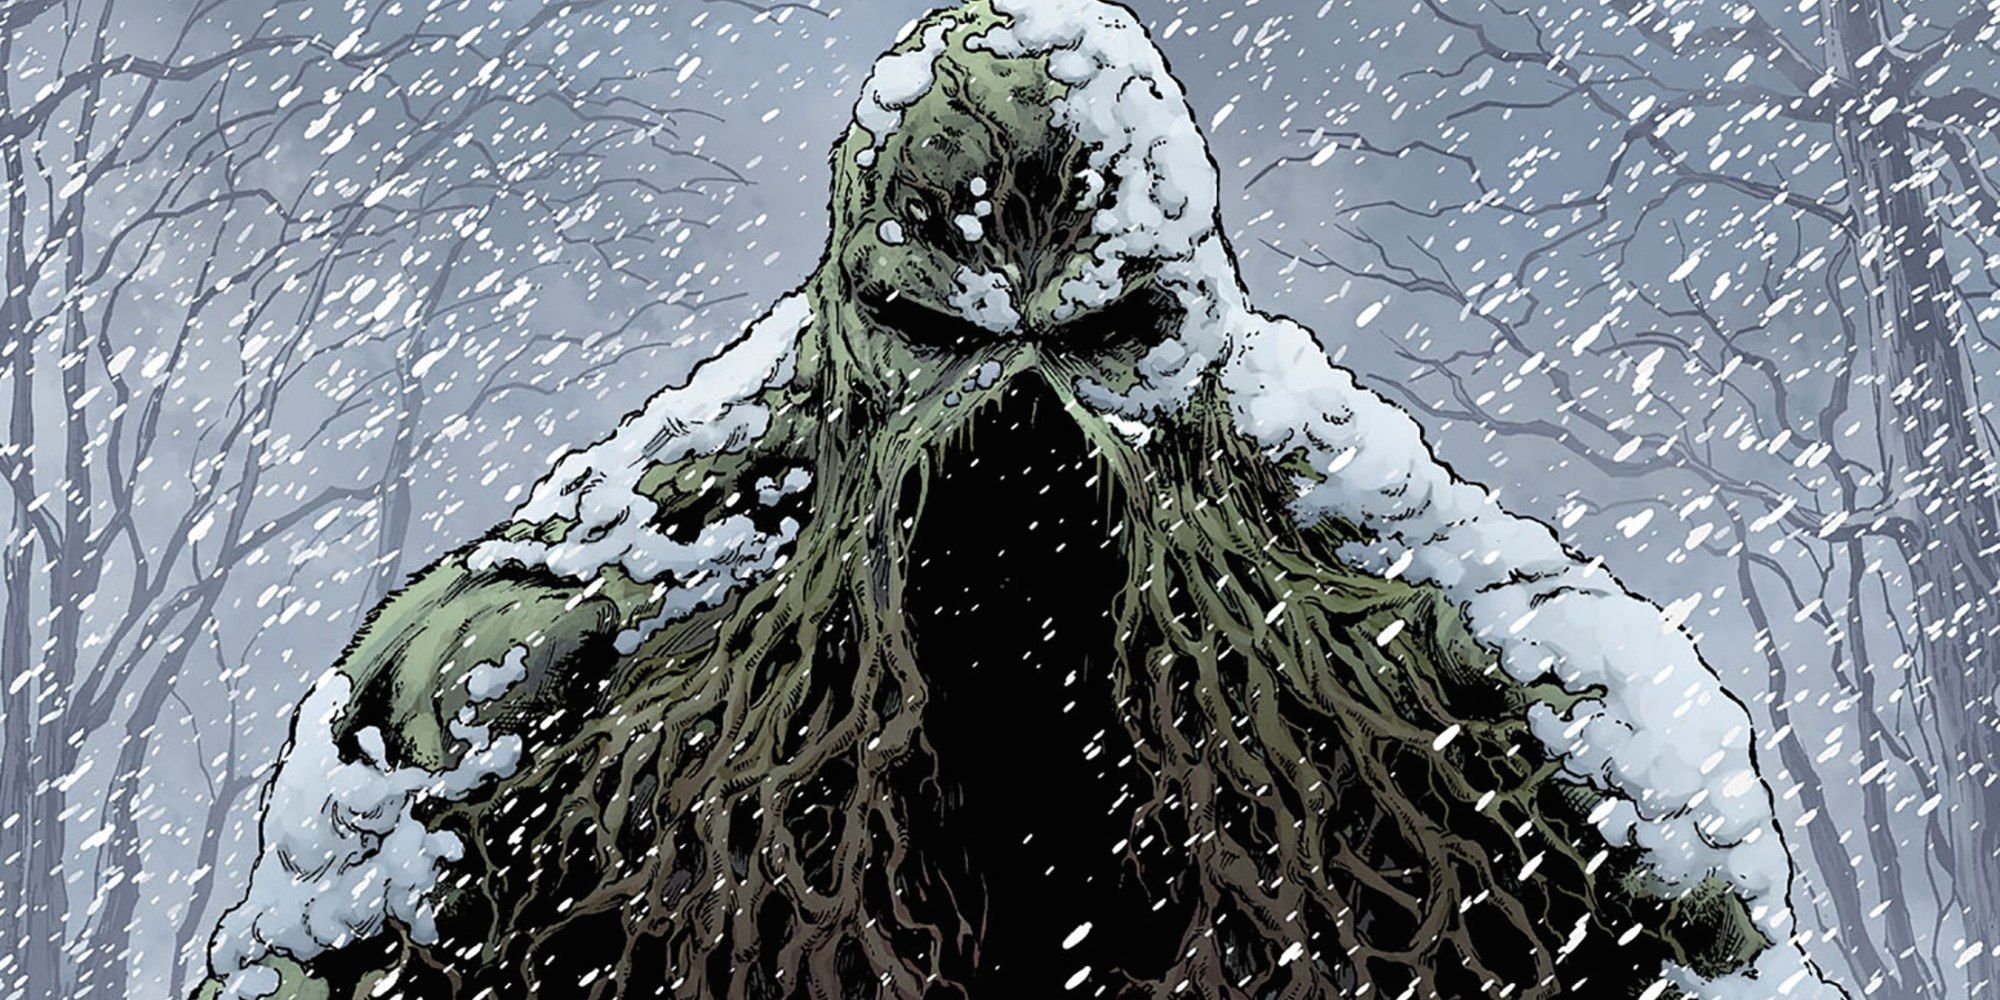 Swamp Thing in the Snow